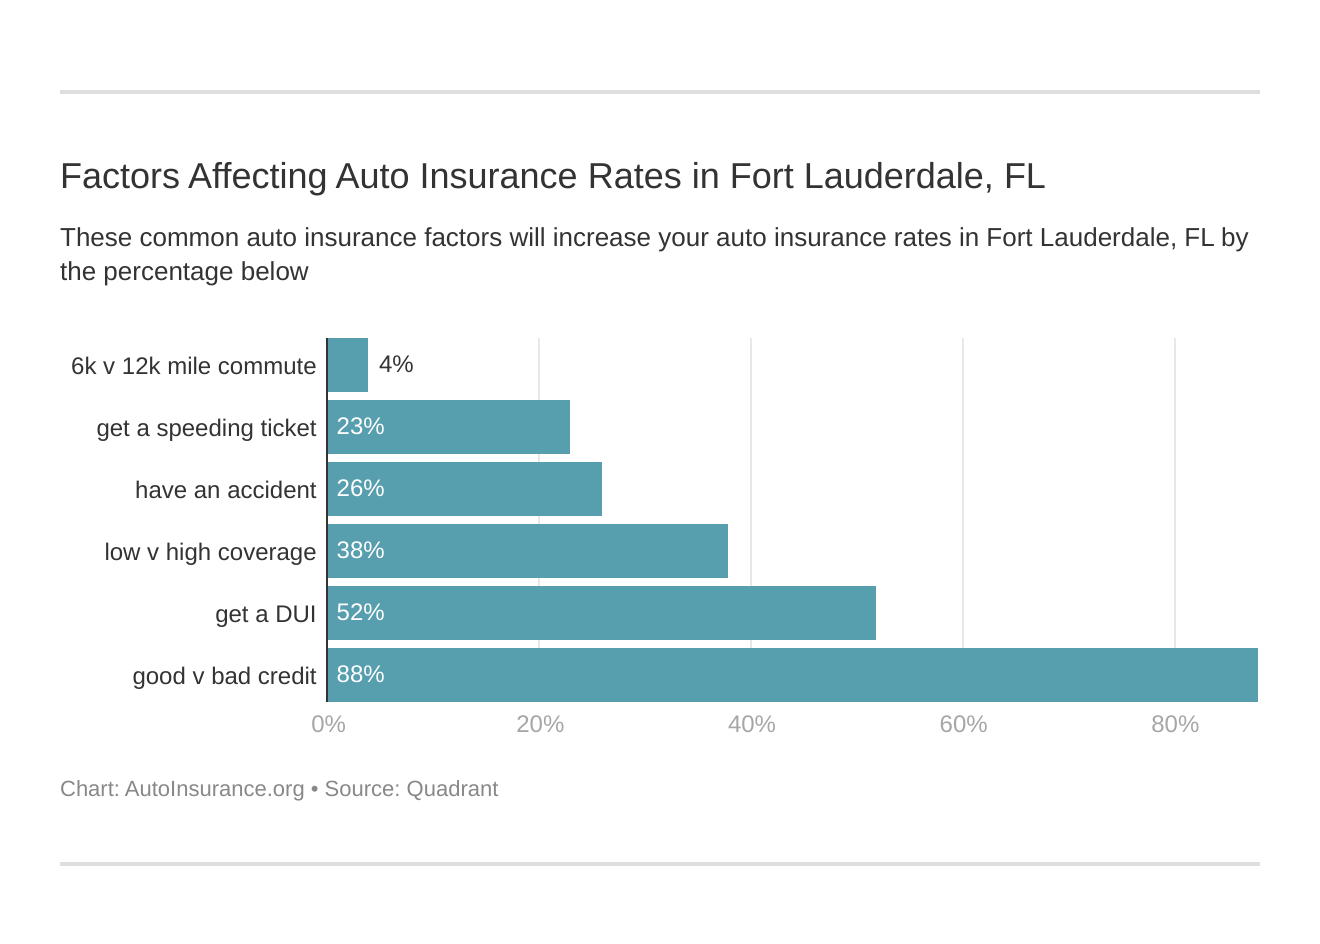 Factors Affecting Auto Insurance Rates in Fort Lauderdale, FL